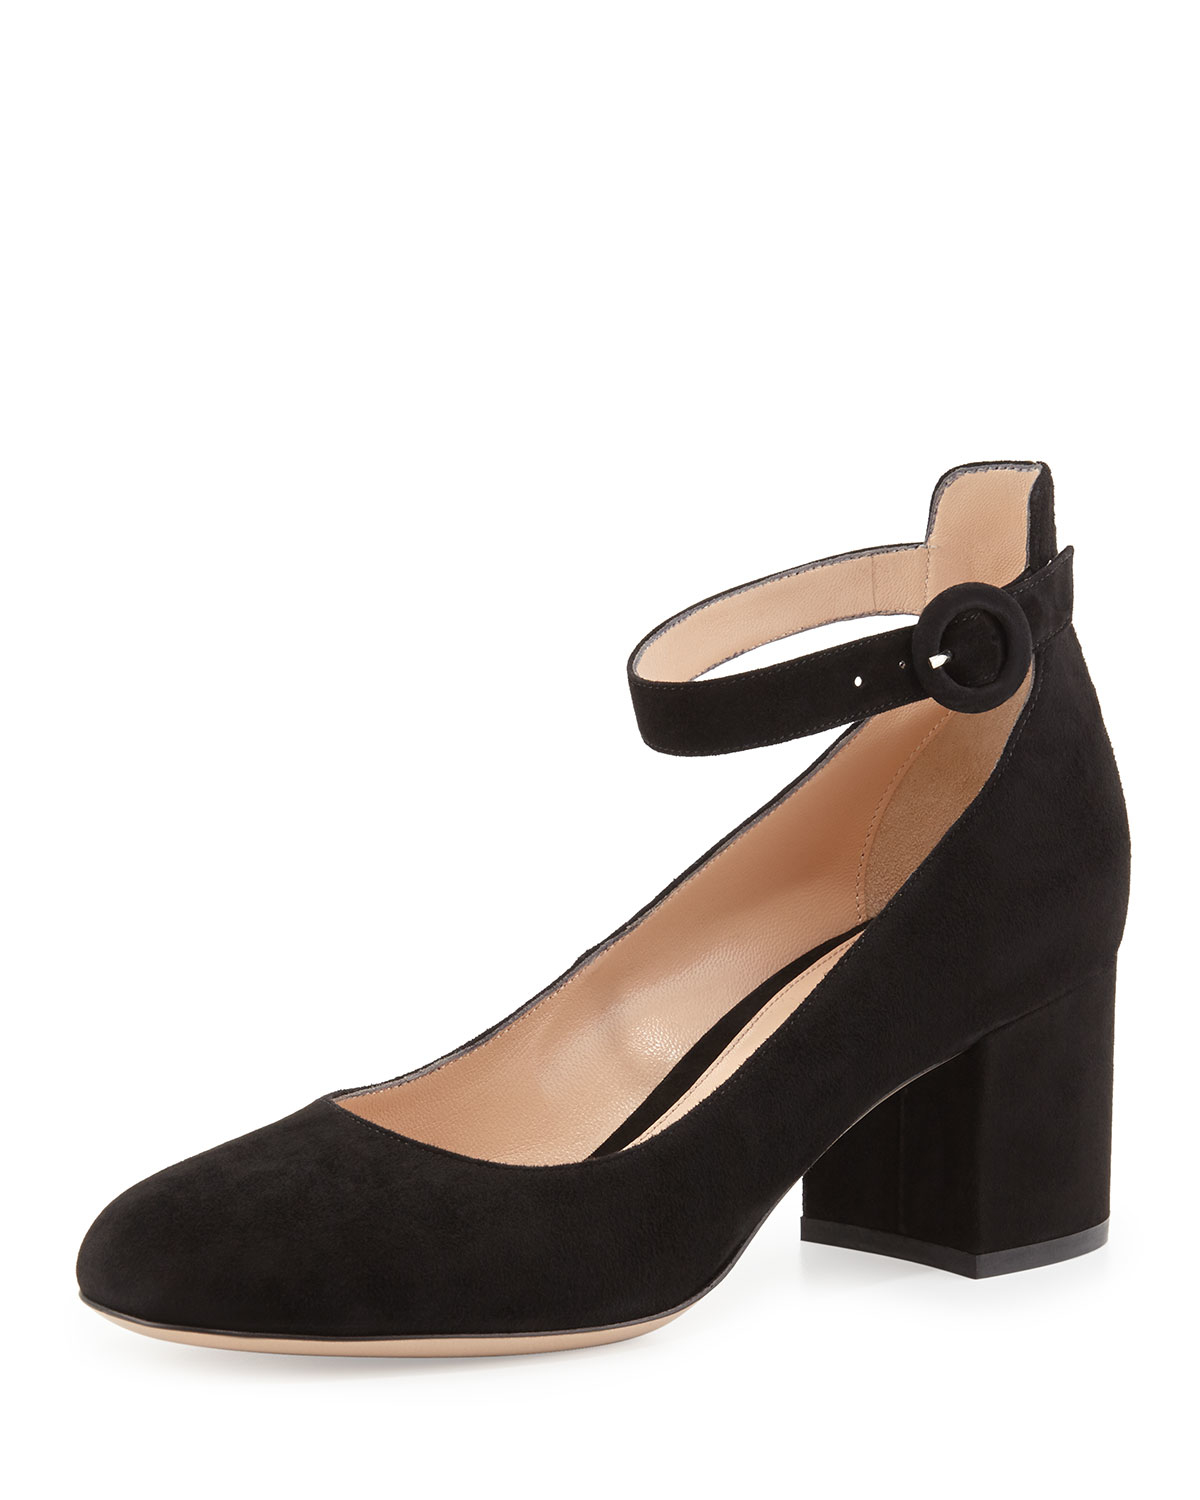 Gianvito Rossi Ankle-Strap Suede Pumps in Black - Lyst